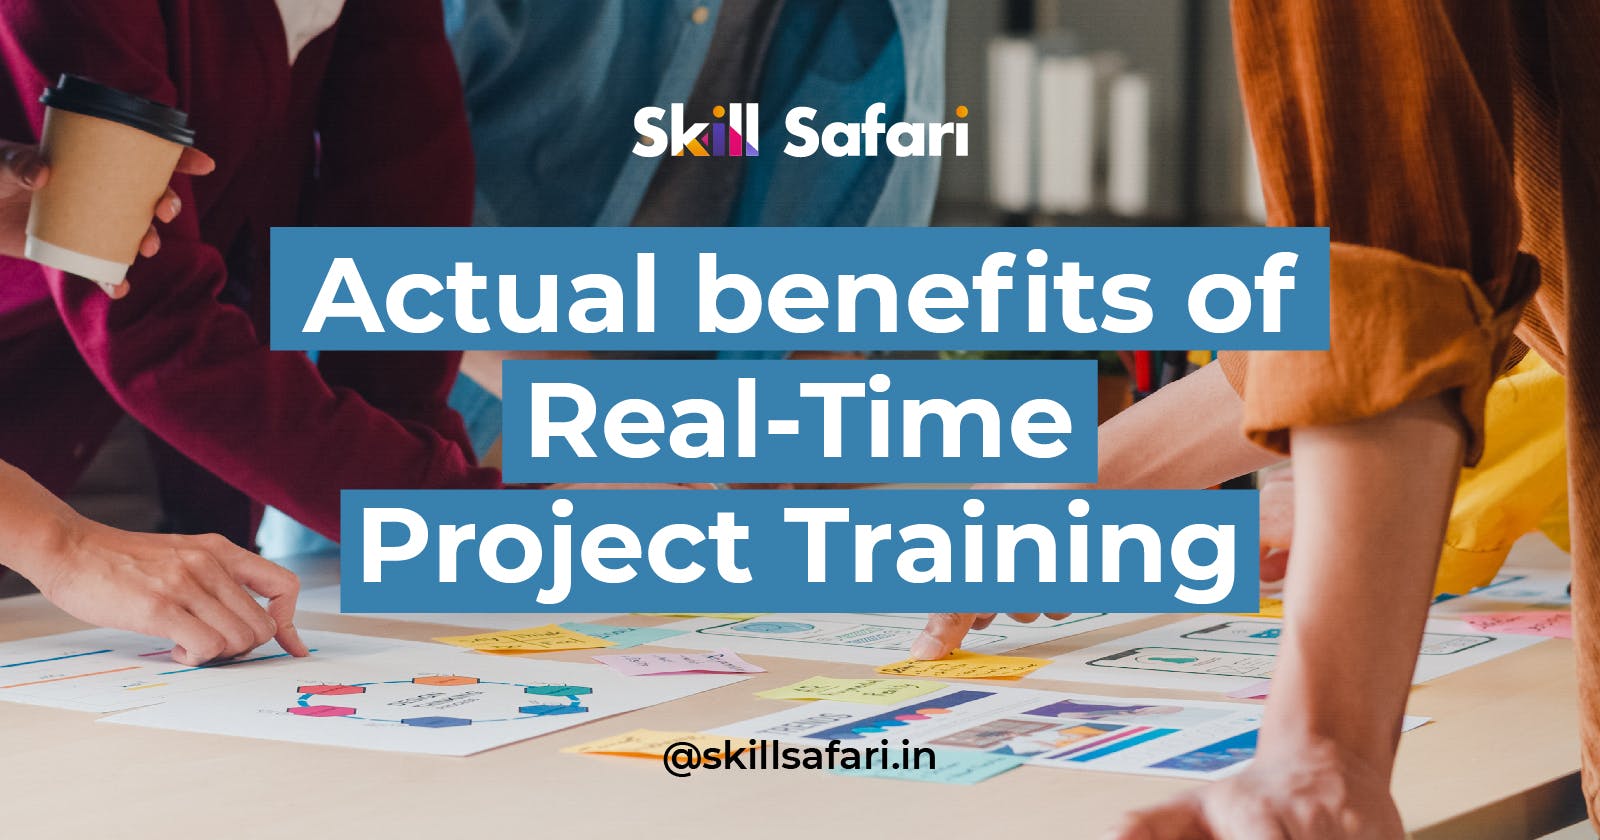 Actual benefits of Real-Time Project Training